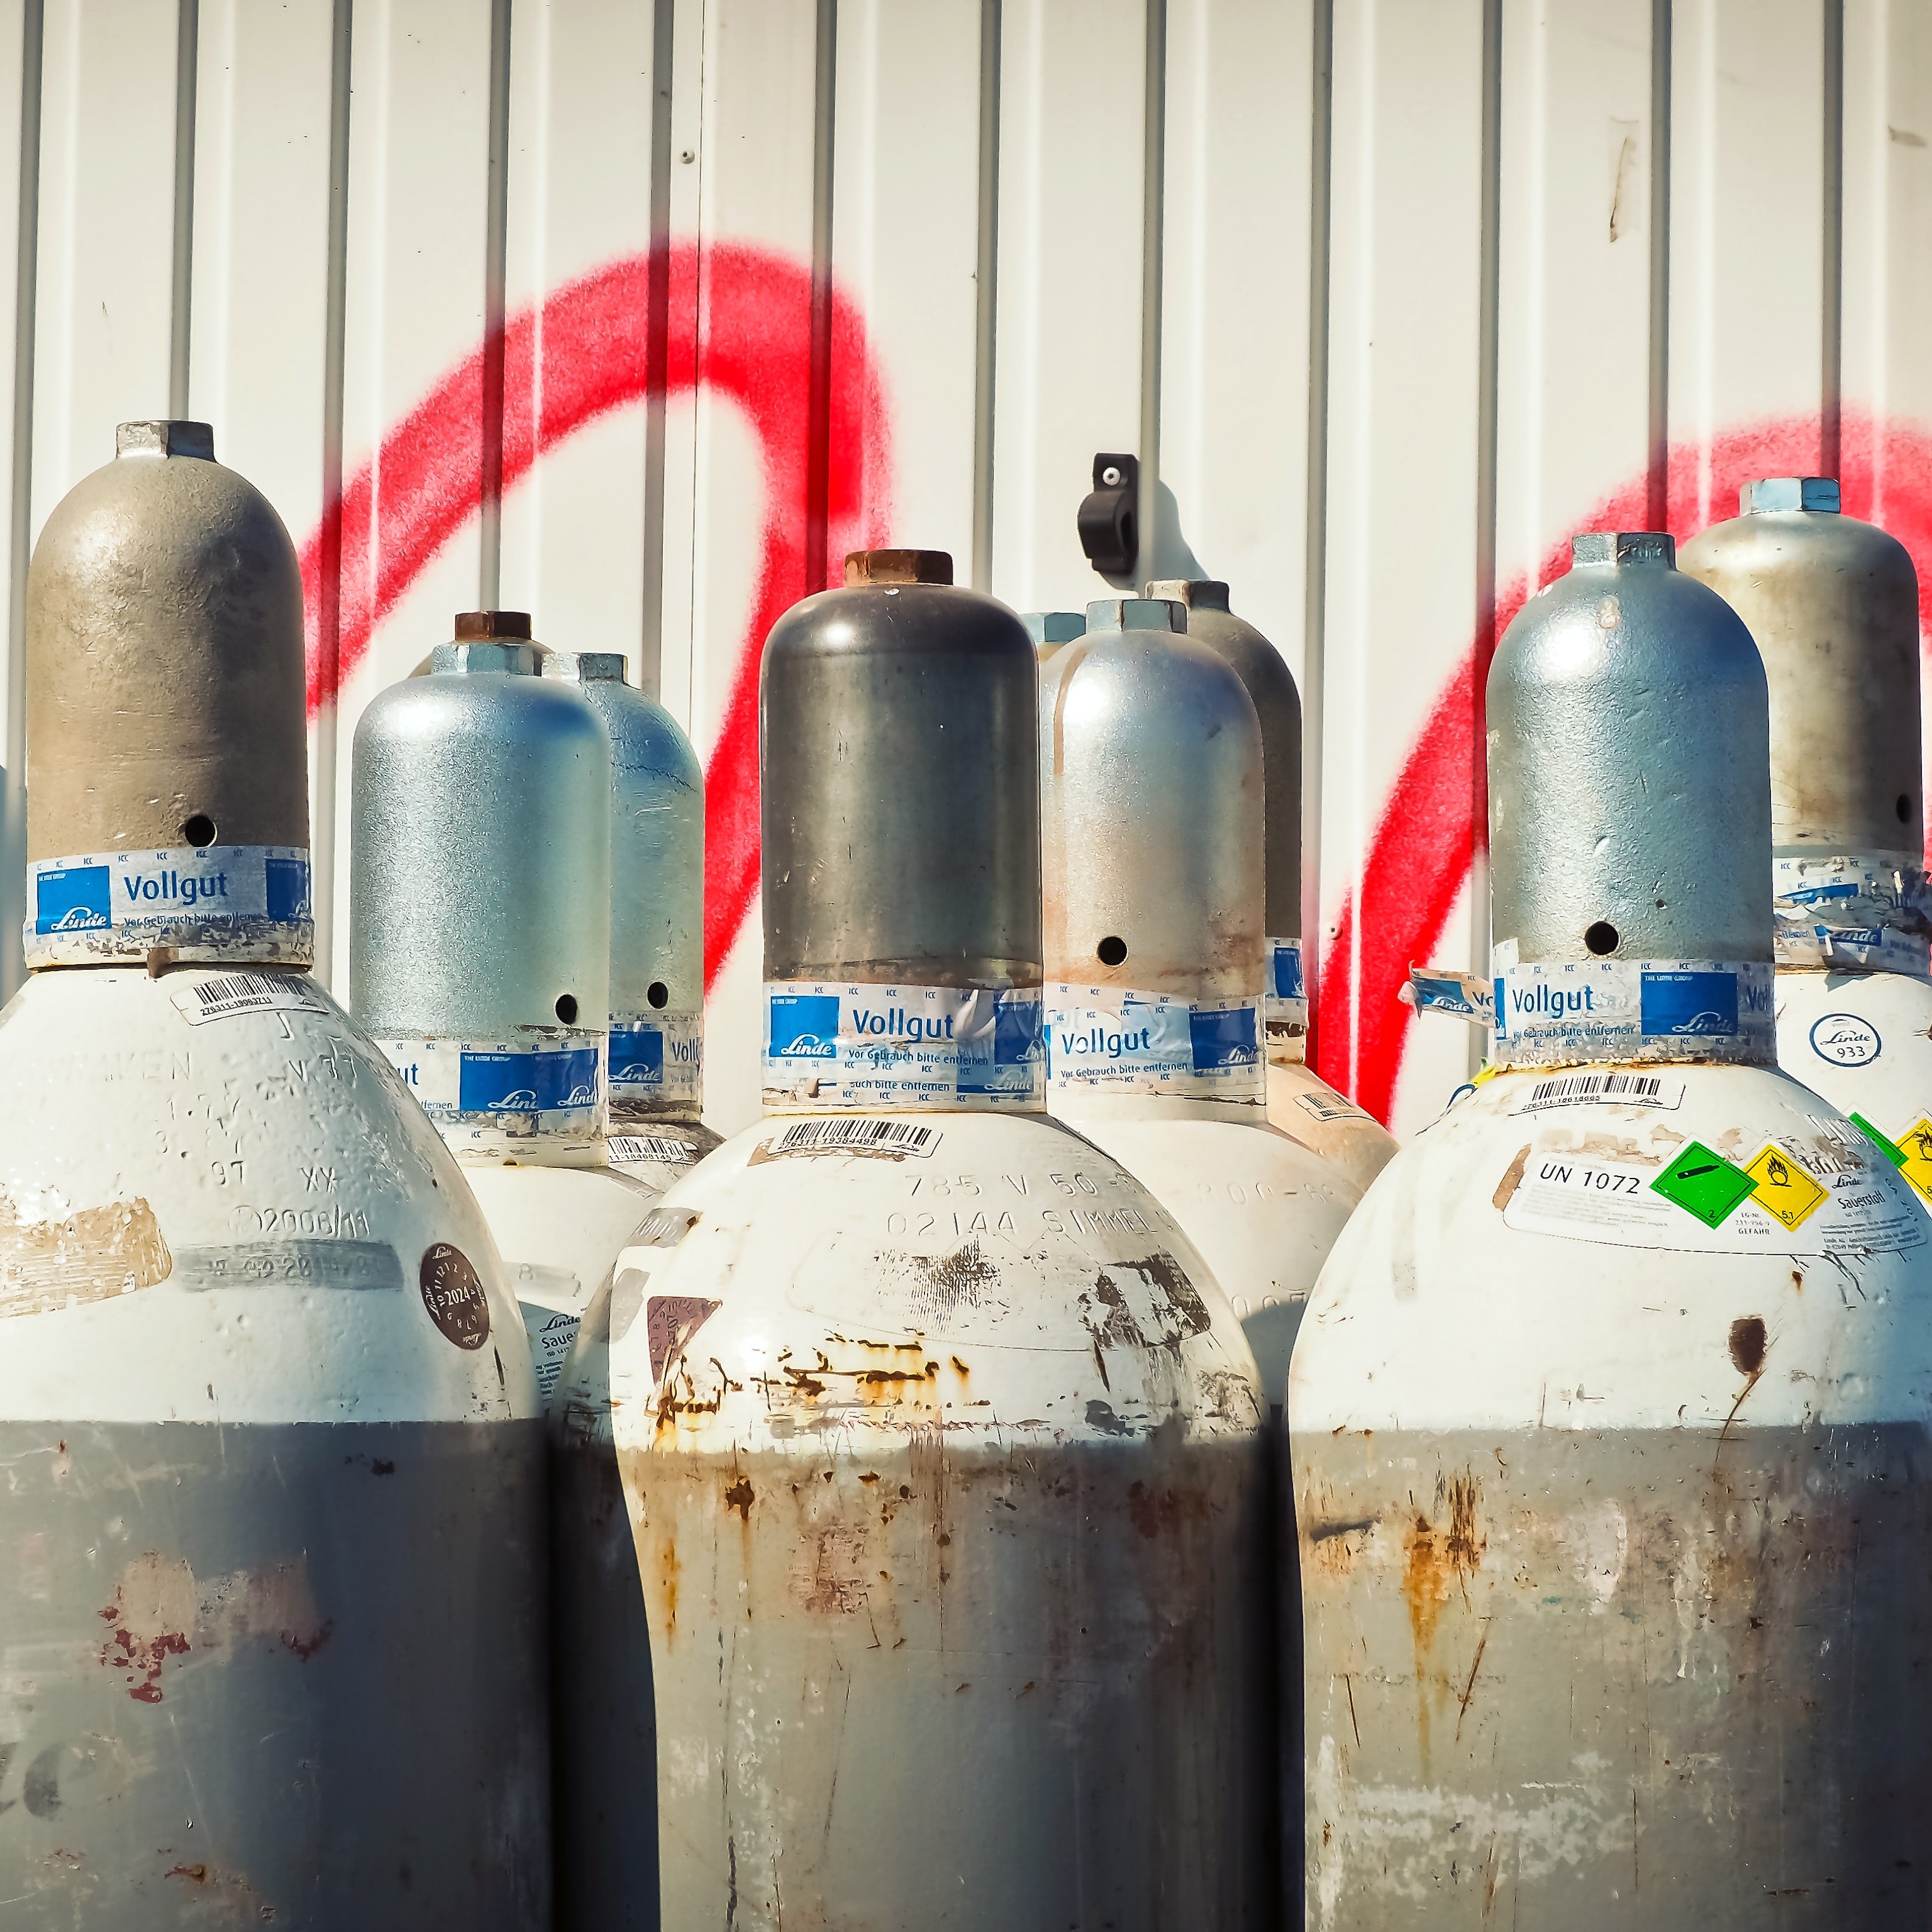 Free photo: Gray Steel Gas Tanks Near White Steel Wall during Daytime ...